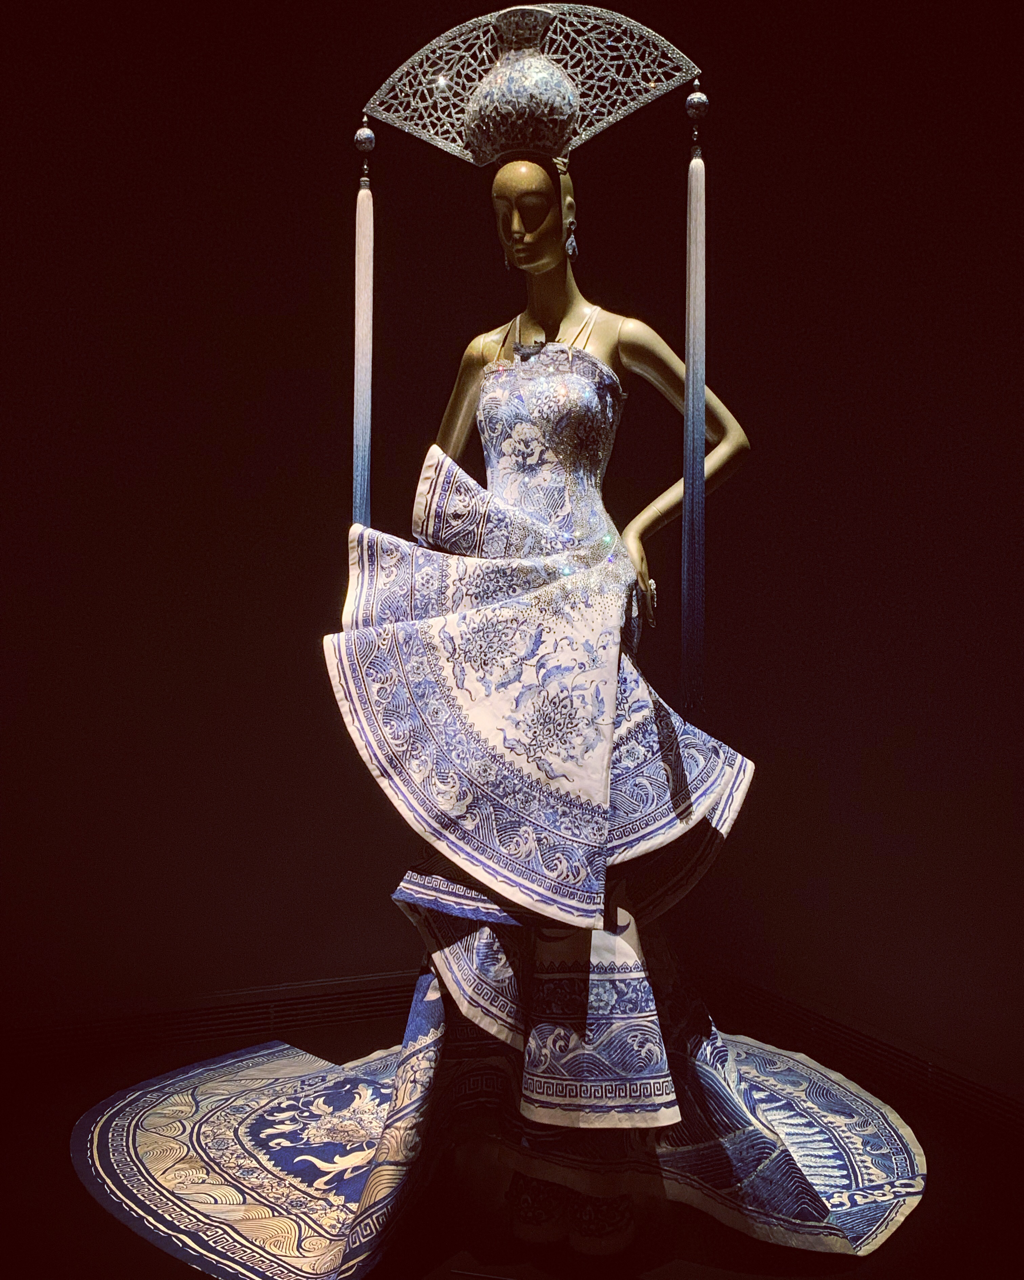 Guo Pei, Chinese Art and Couture Exhibition - Museums are awesome